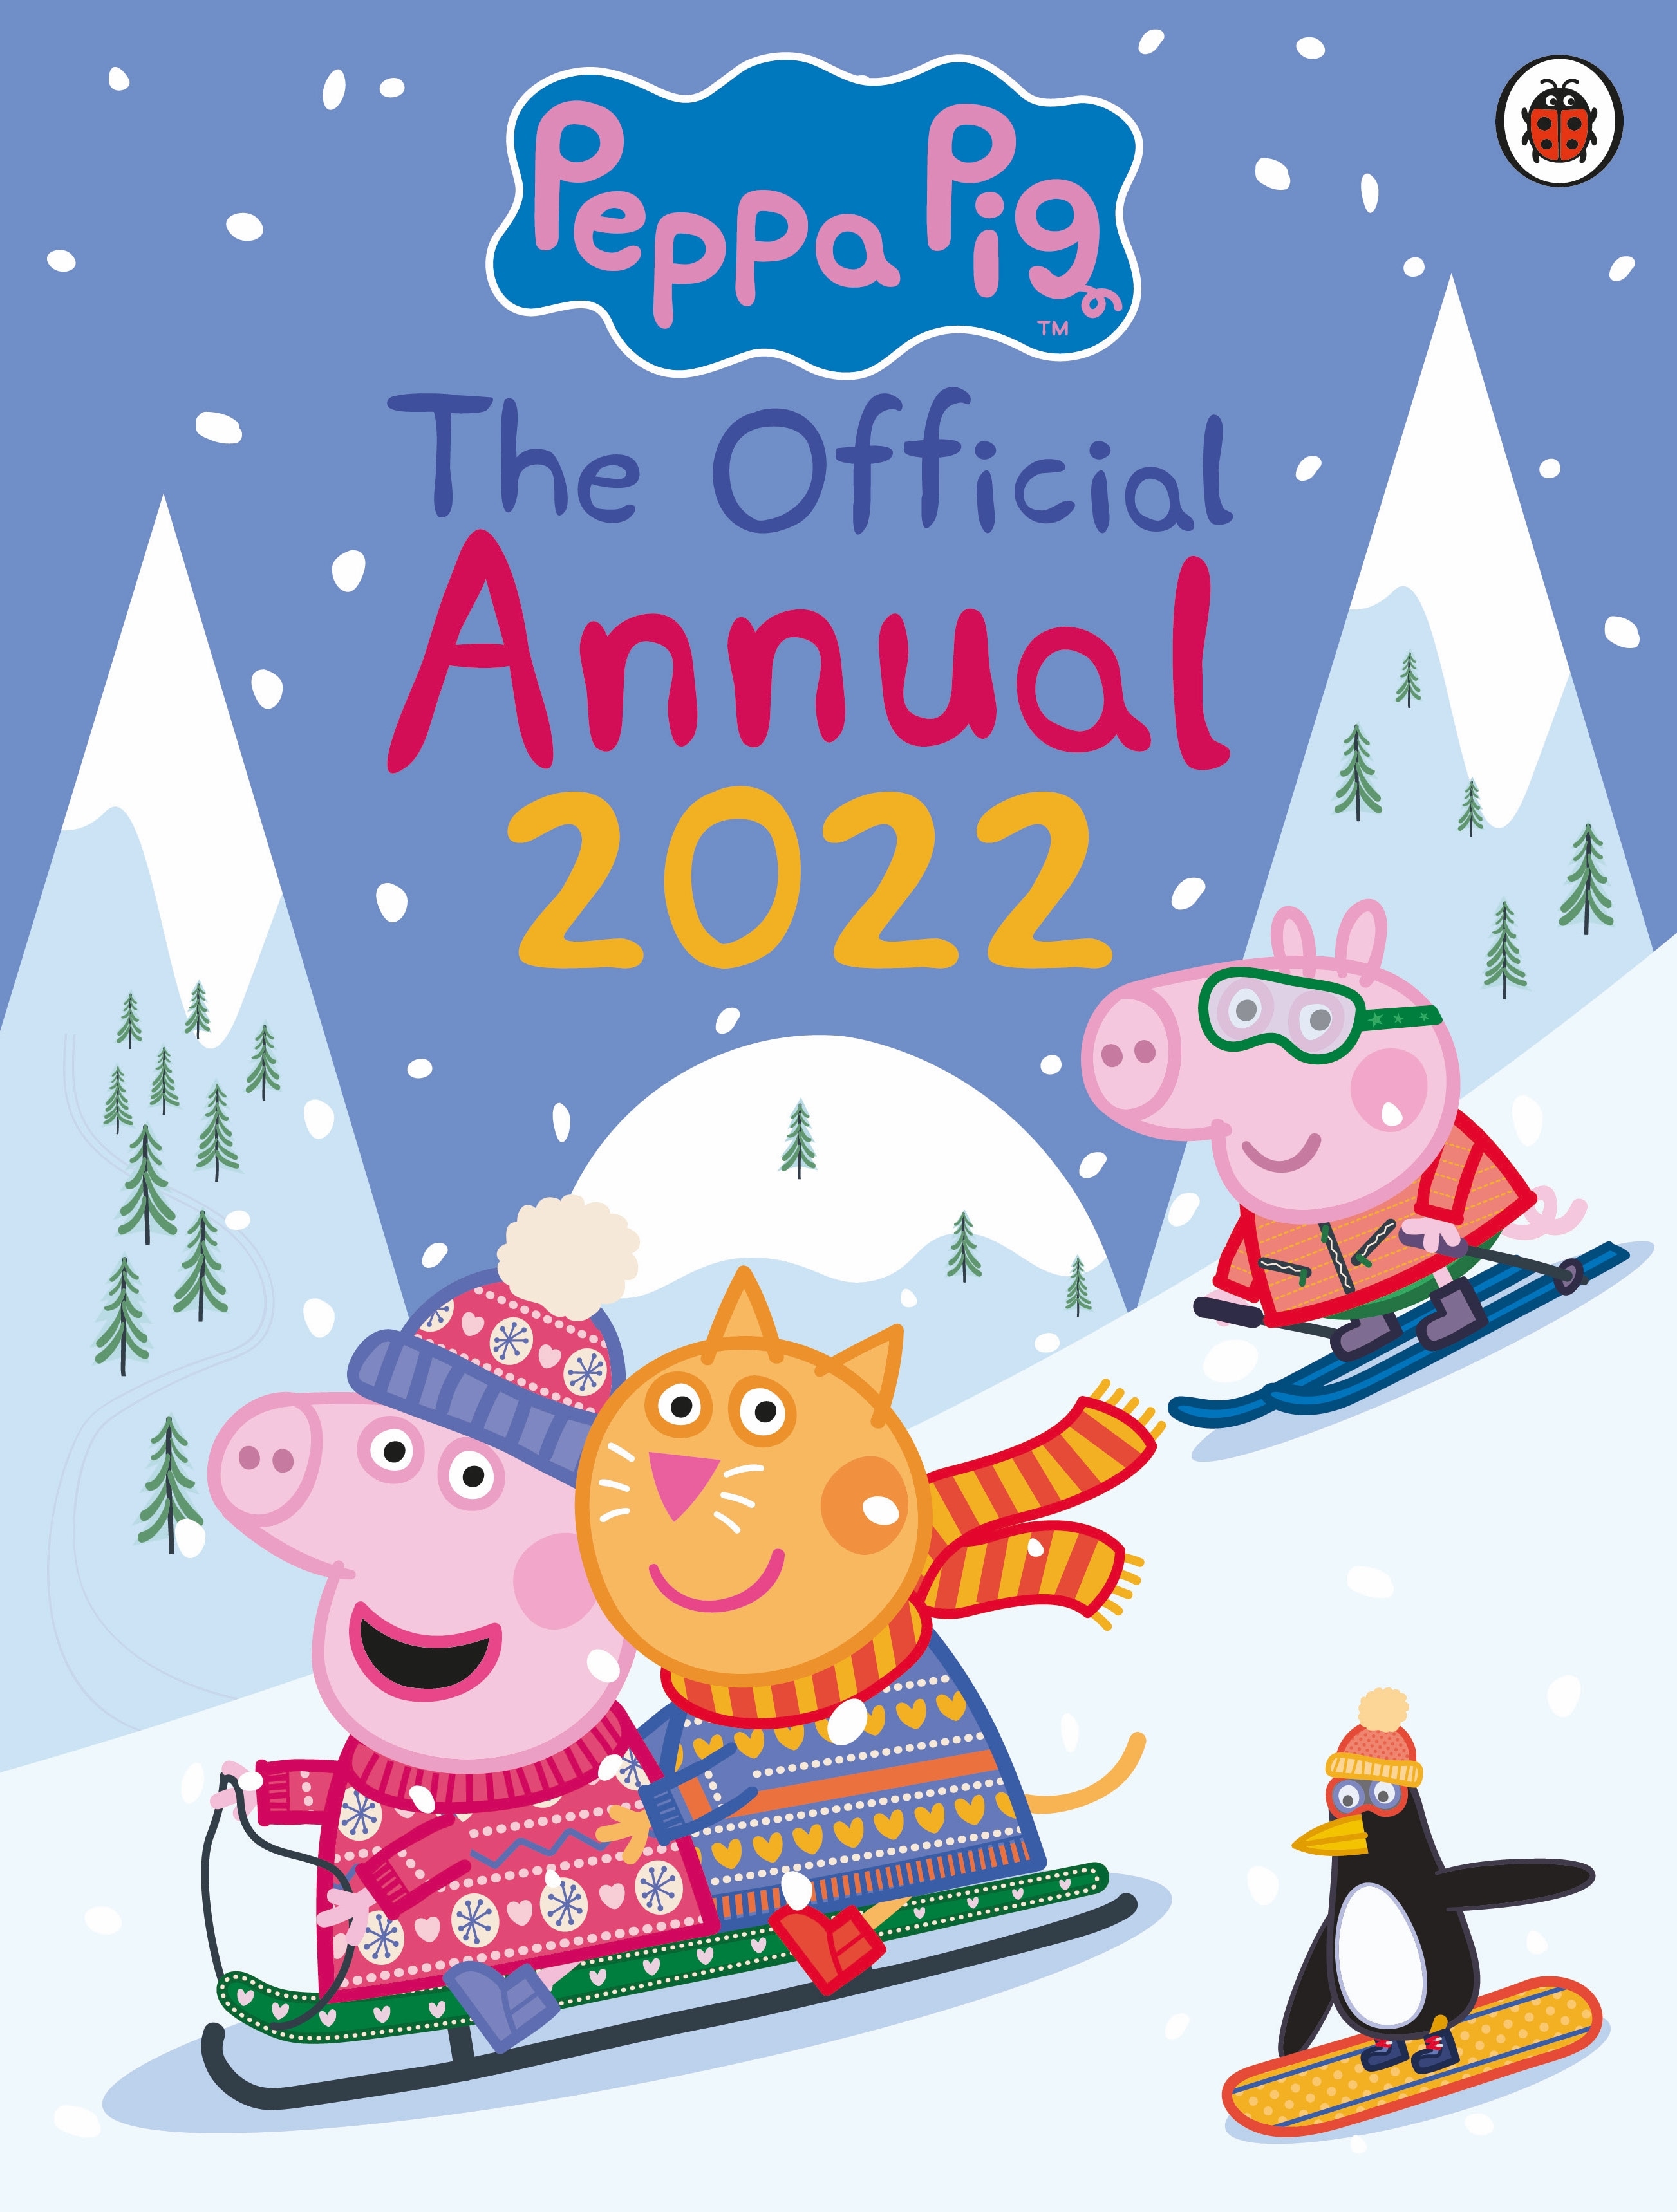 Book “Peppa Pig: The Official Annual 2022” by Peppa Pig — September 2, 2021